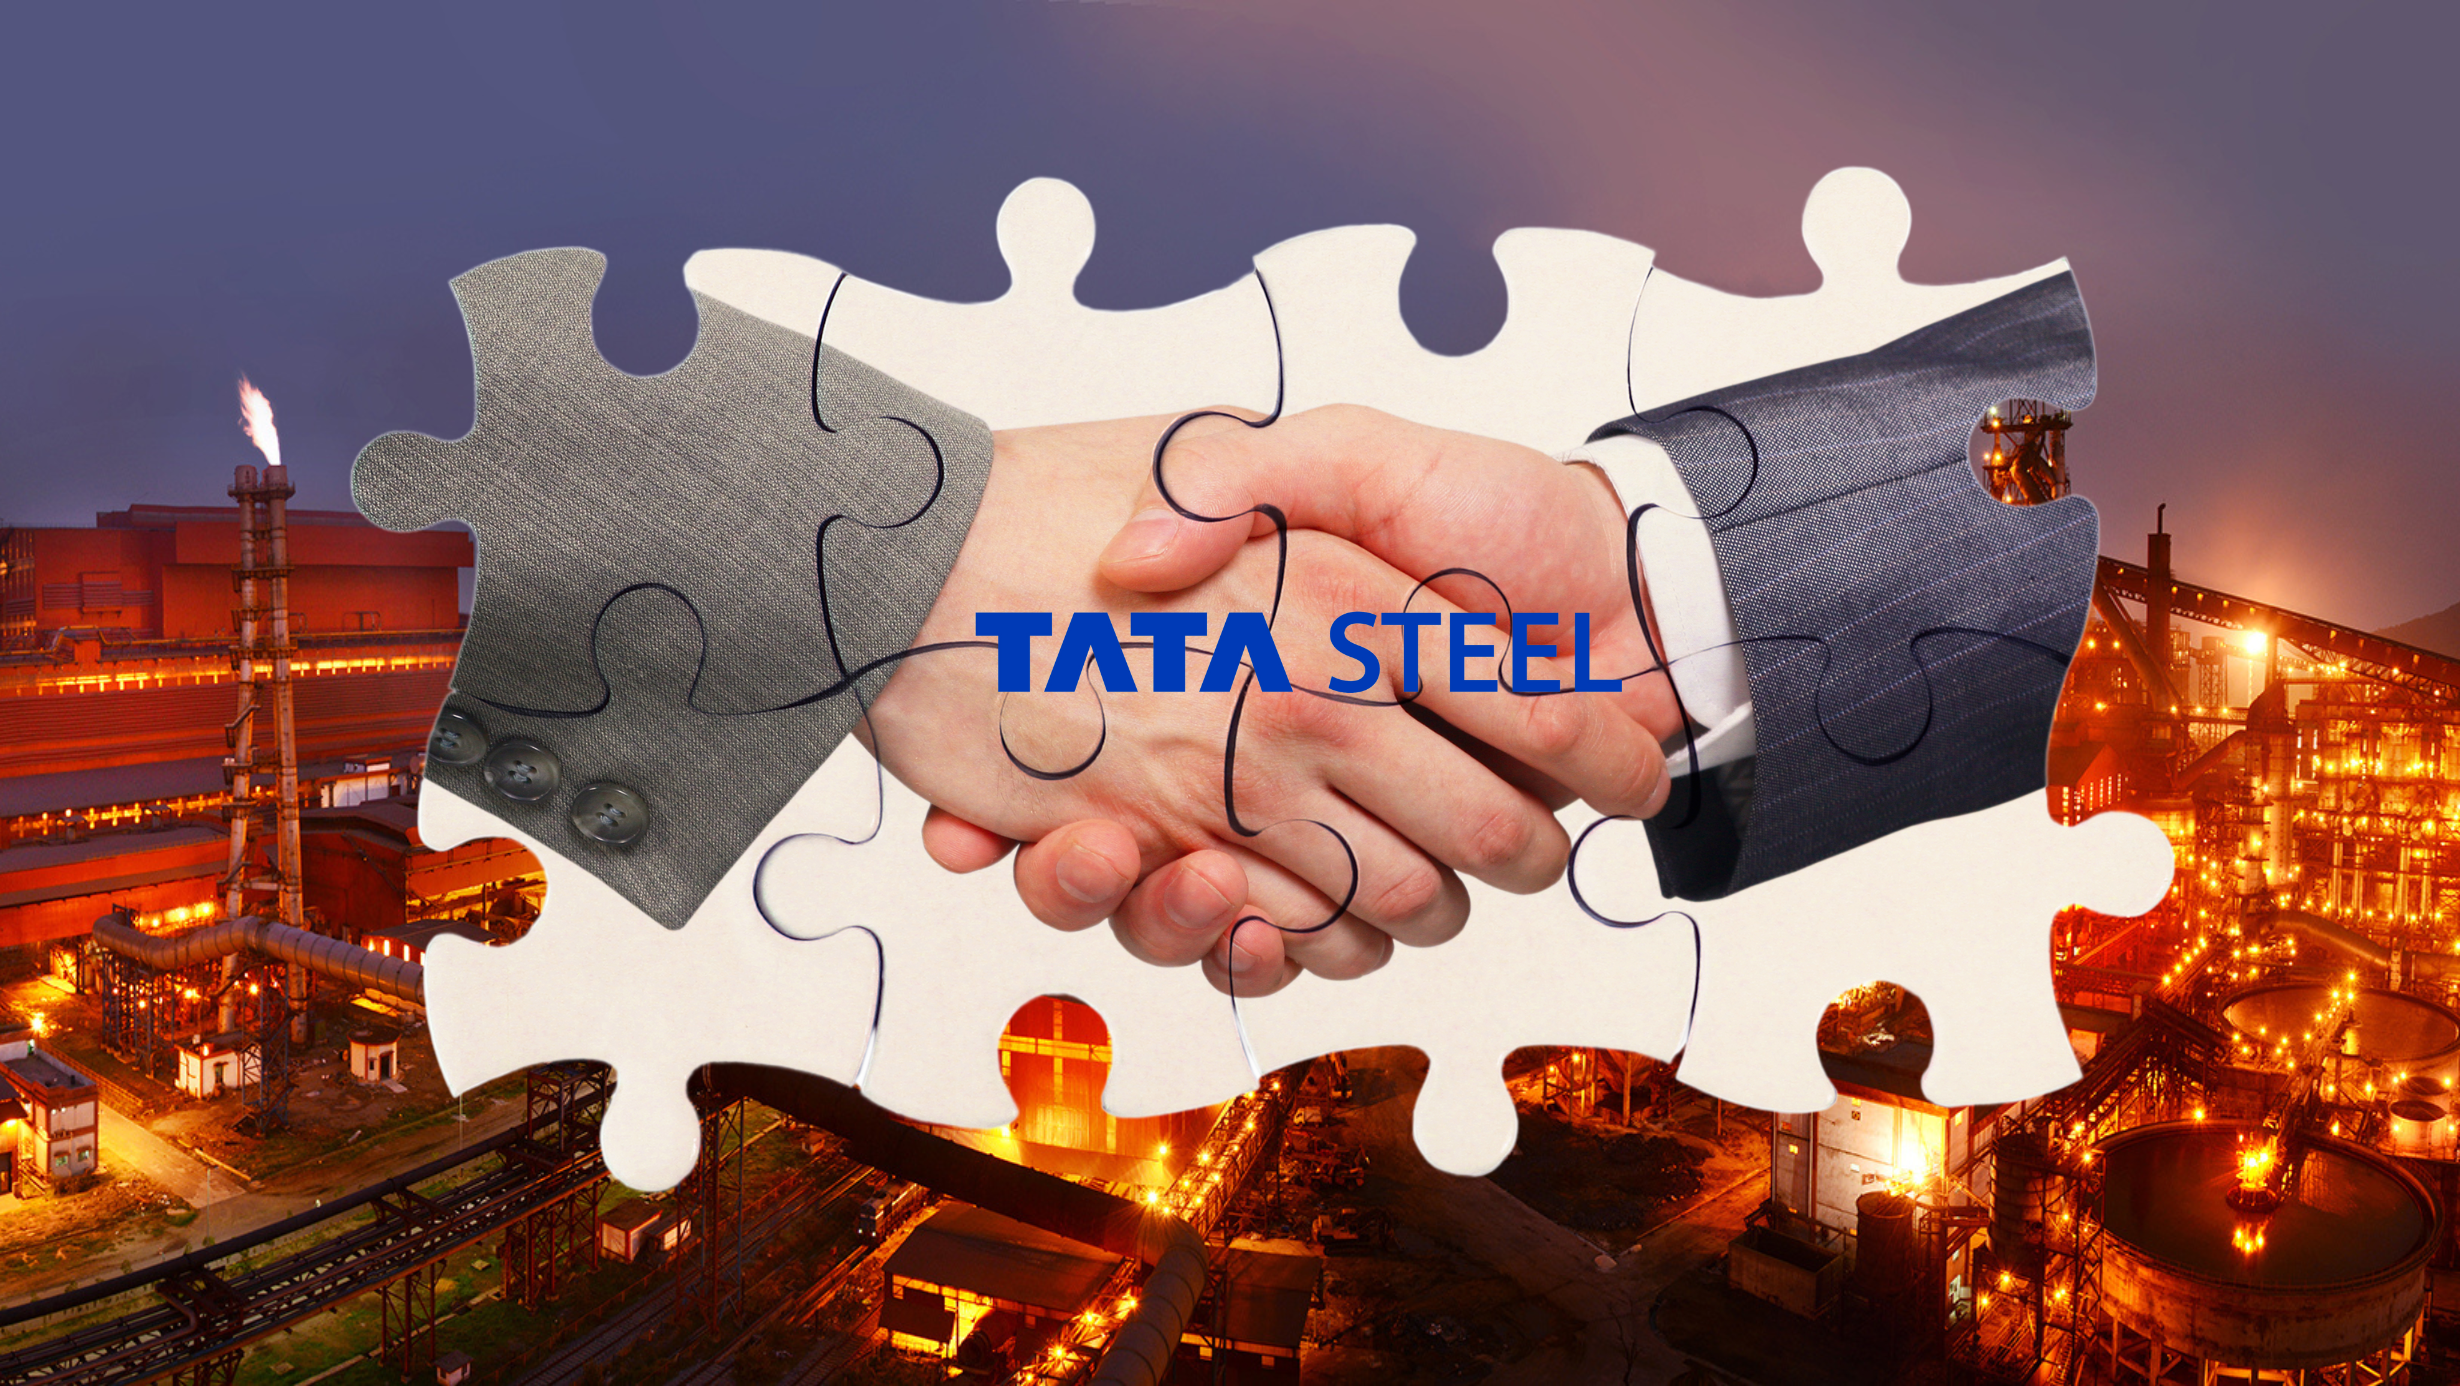 Tata Steel png images